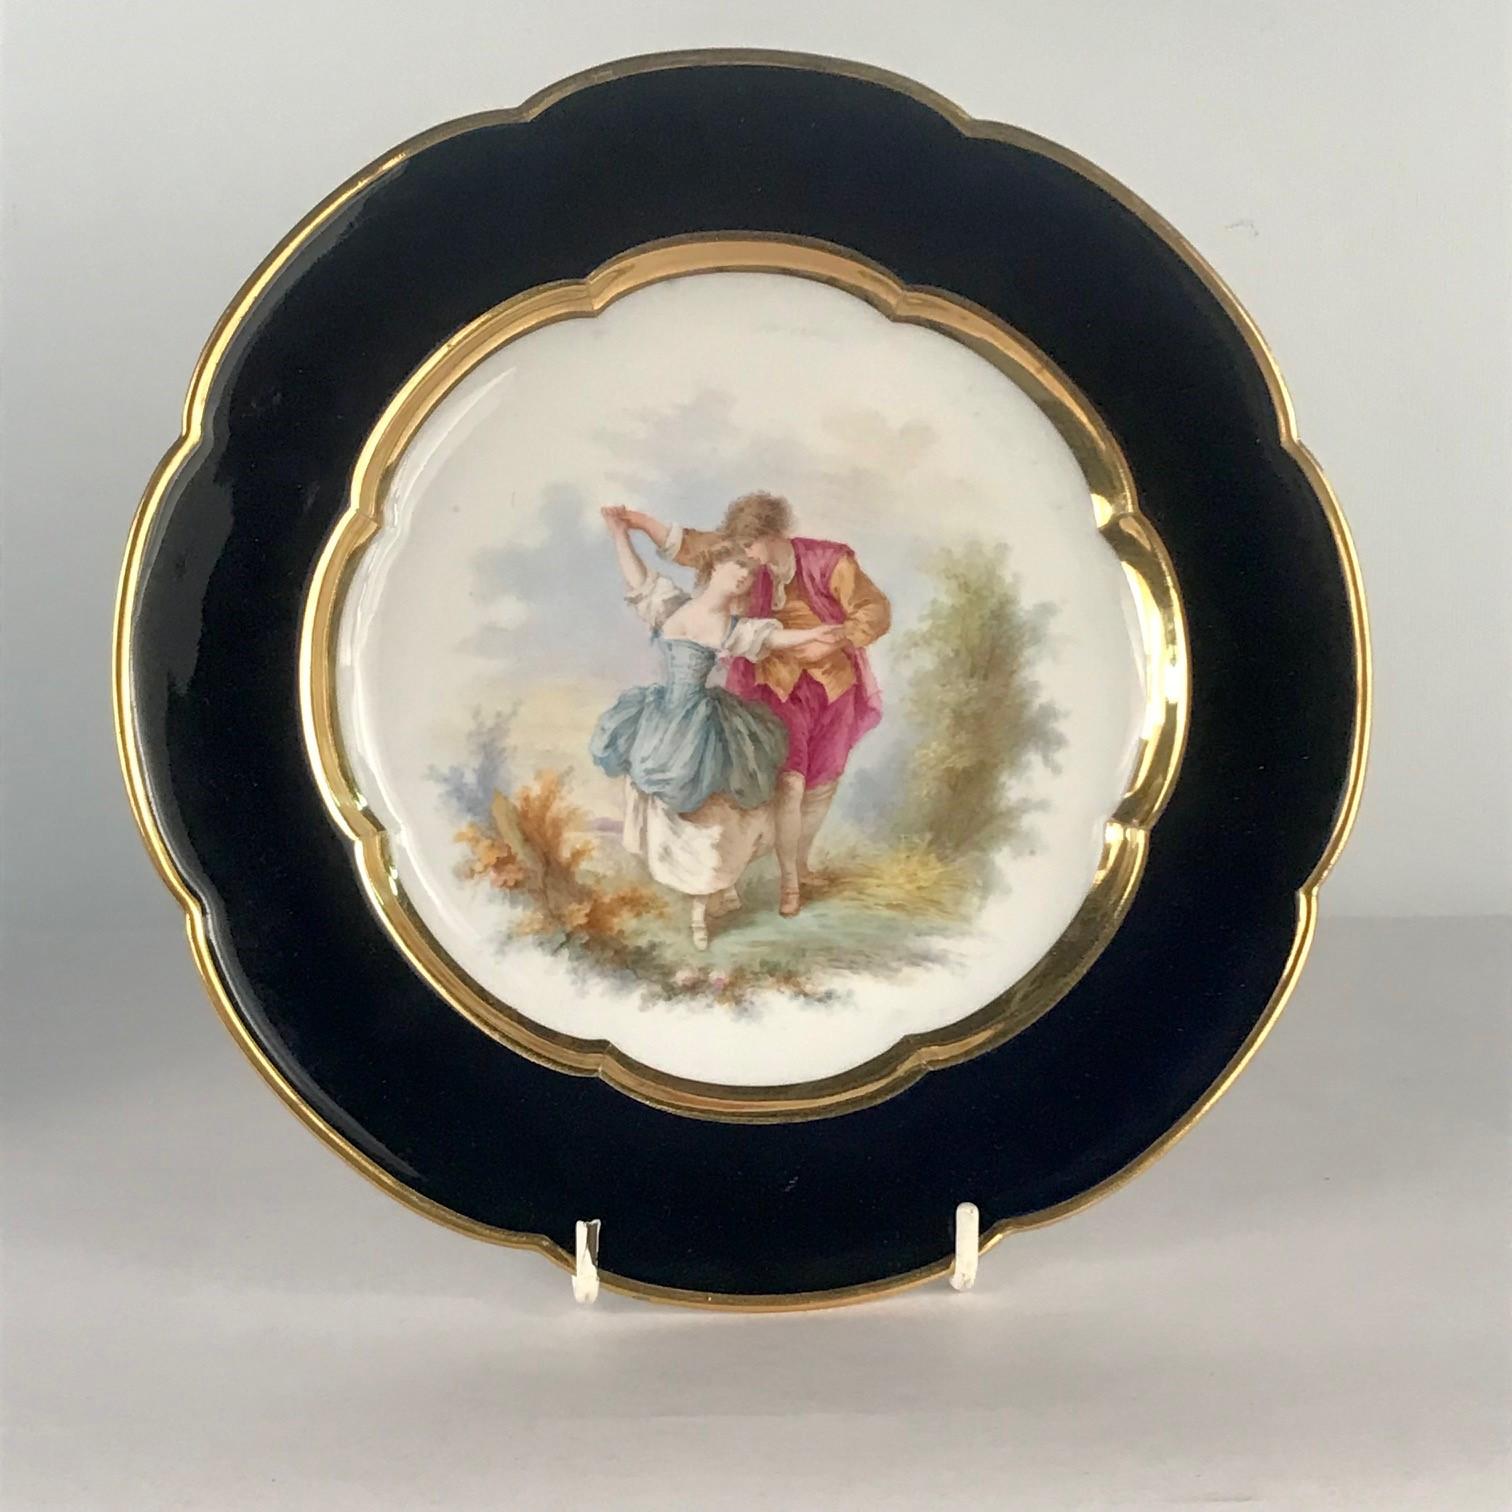 This pair are painted with lovers in a romantic and rustic landscape. There are two Scenes Gallantes: dancing in one, resting by a fountain in the other, a small dog perhaps emblematic of faithfulness begs in the background. Each plate is gilt,